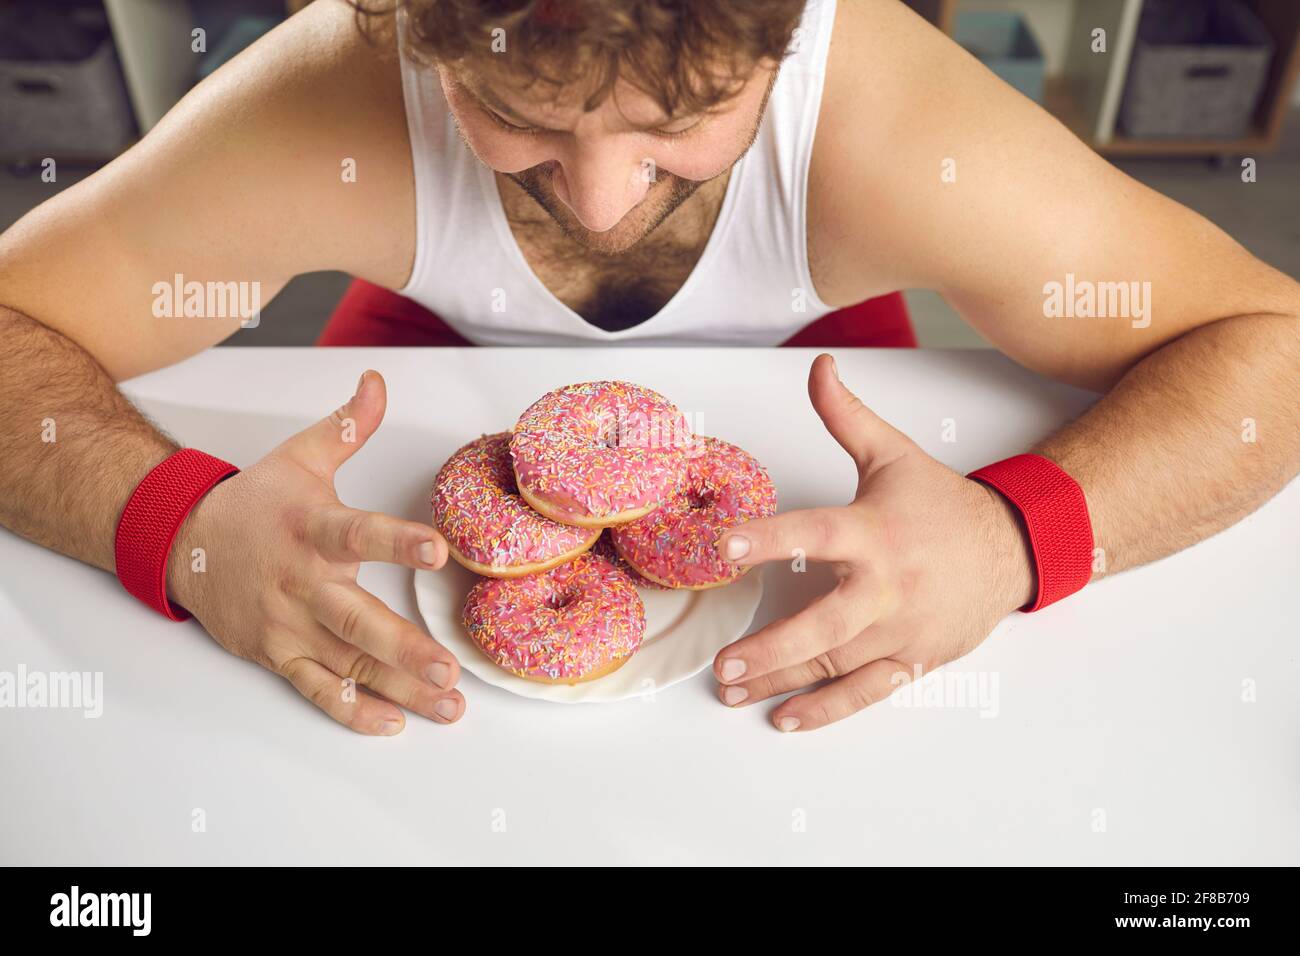 From above shot of a happy chubby man looking at a plate of tempting sugary donuts Stock Photo